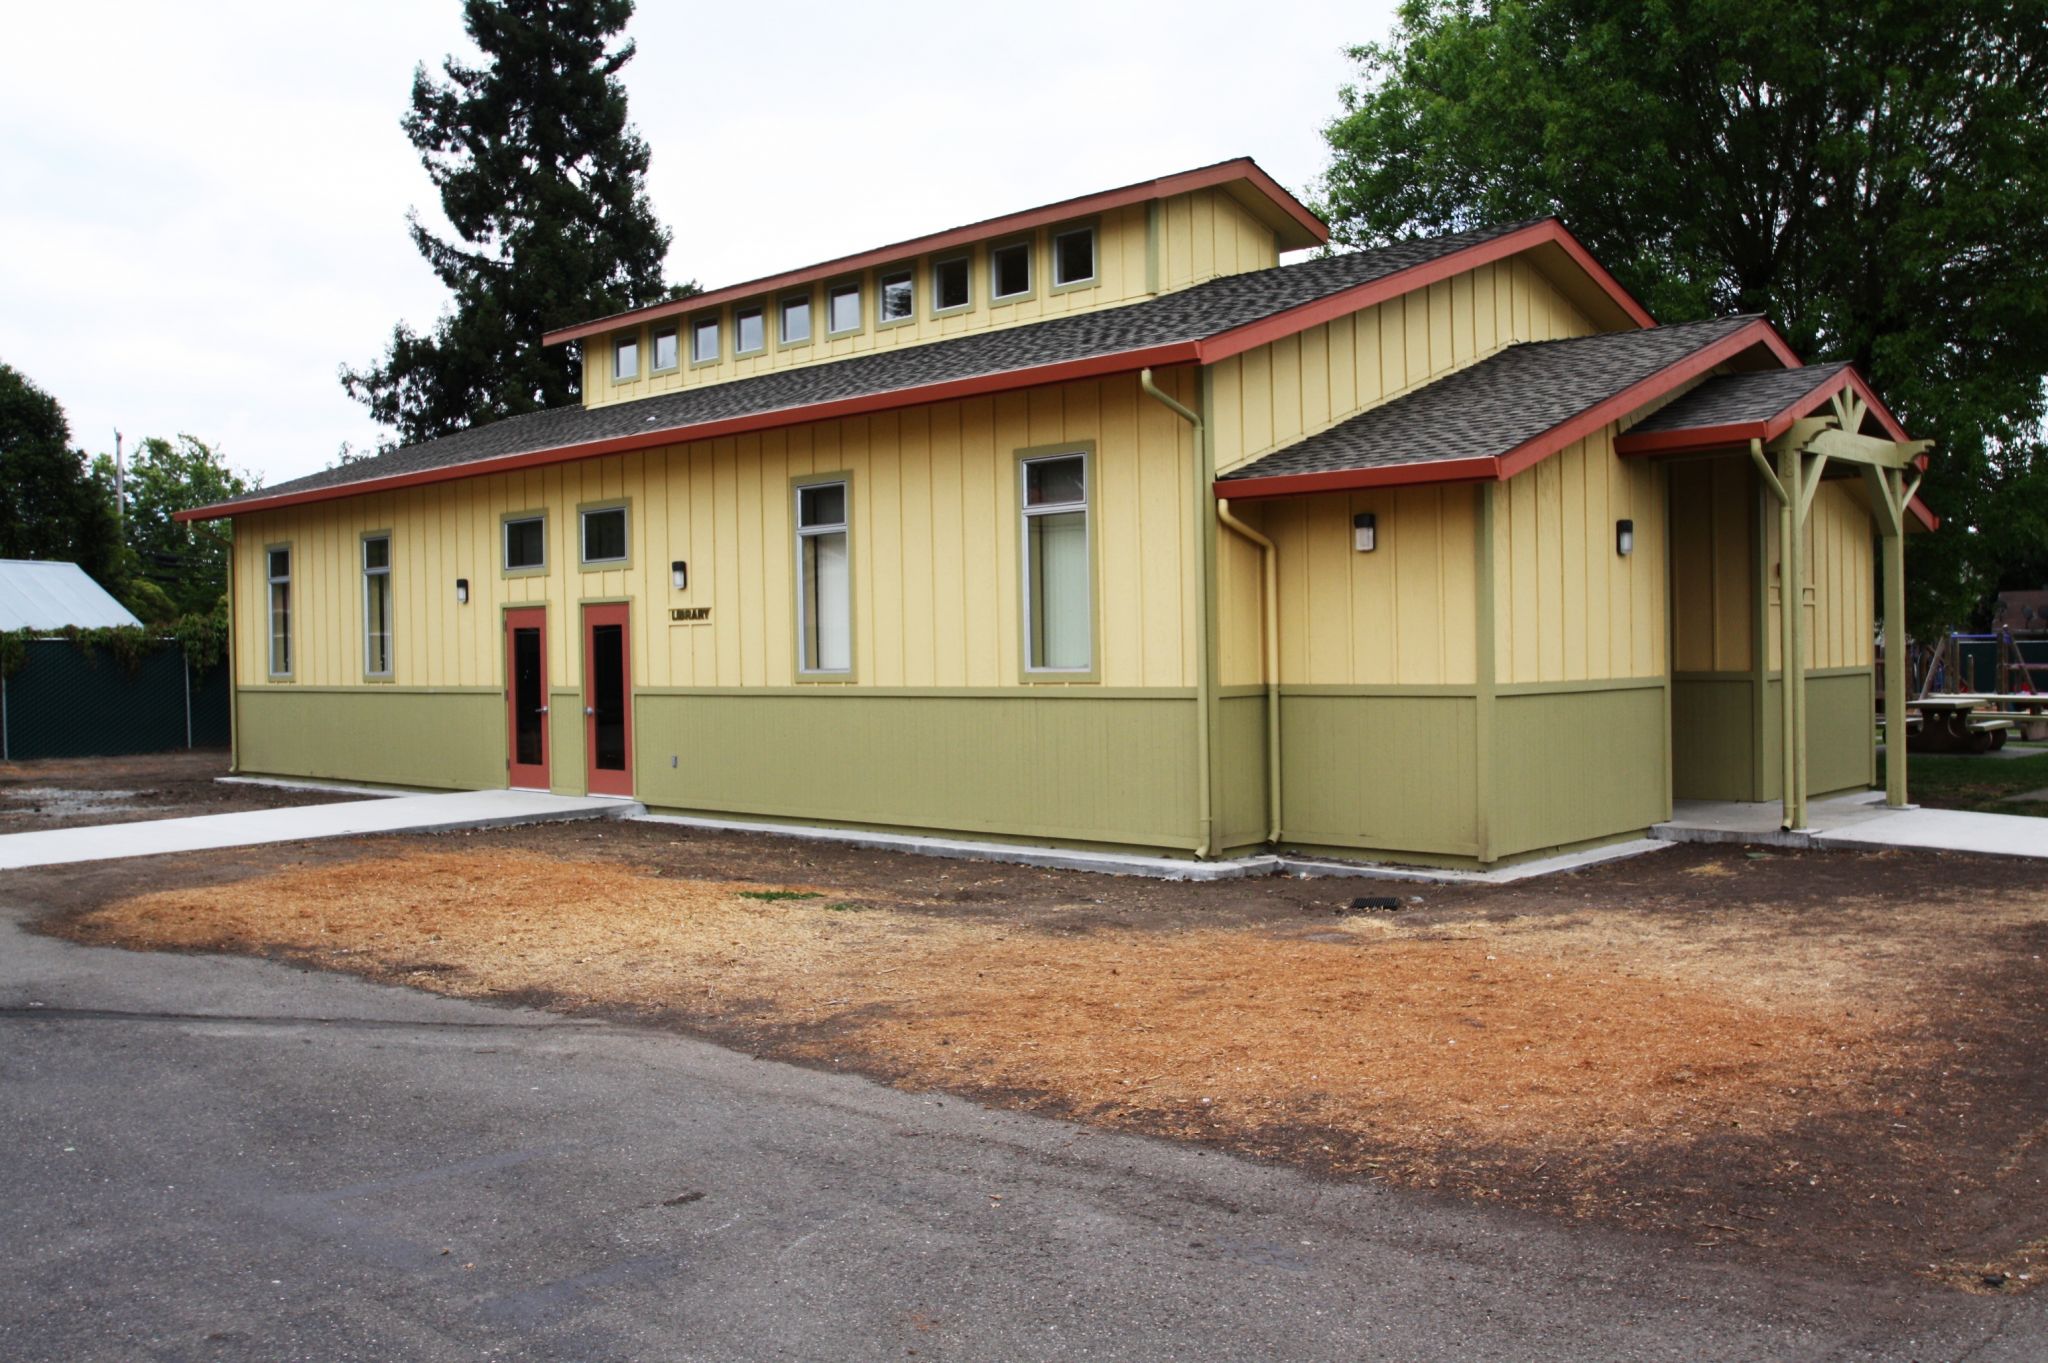 Exterior of Modular Library Building at Roseland Elementary School